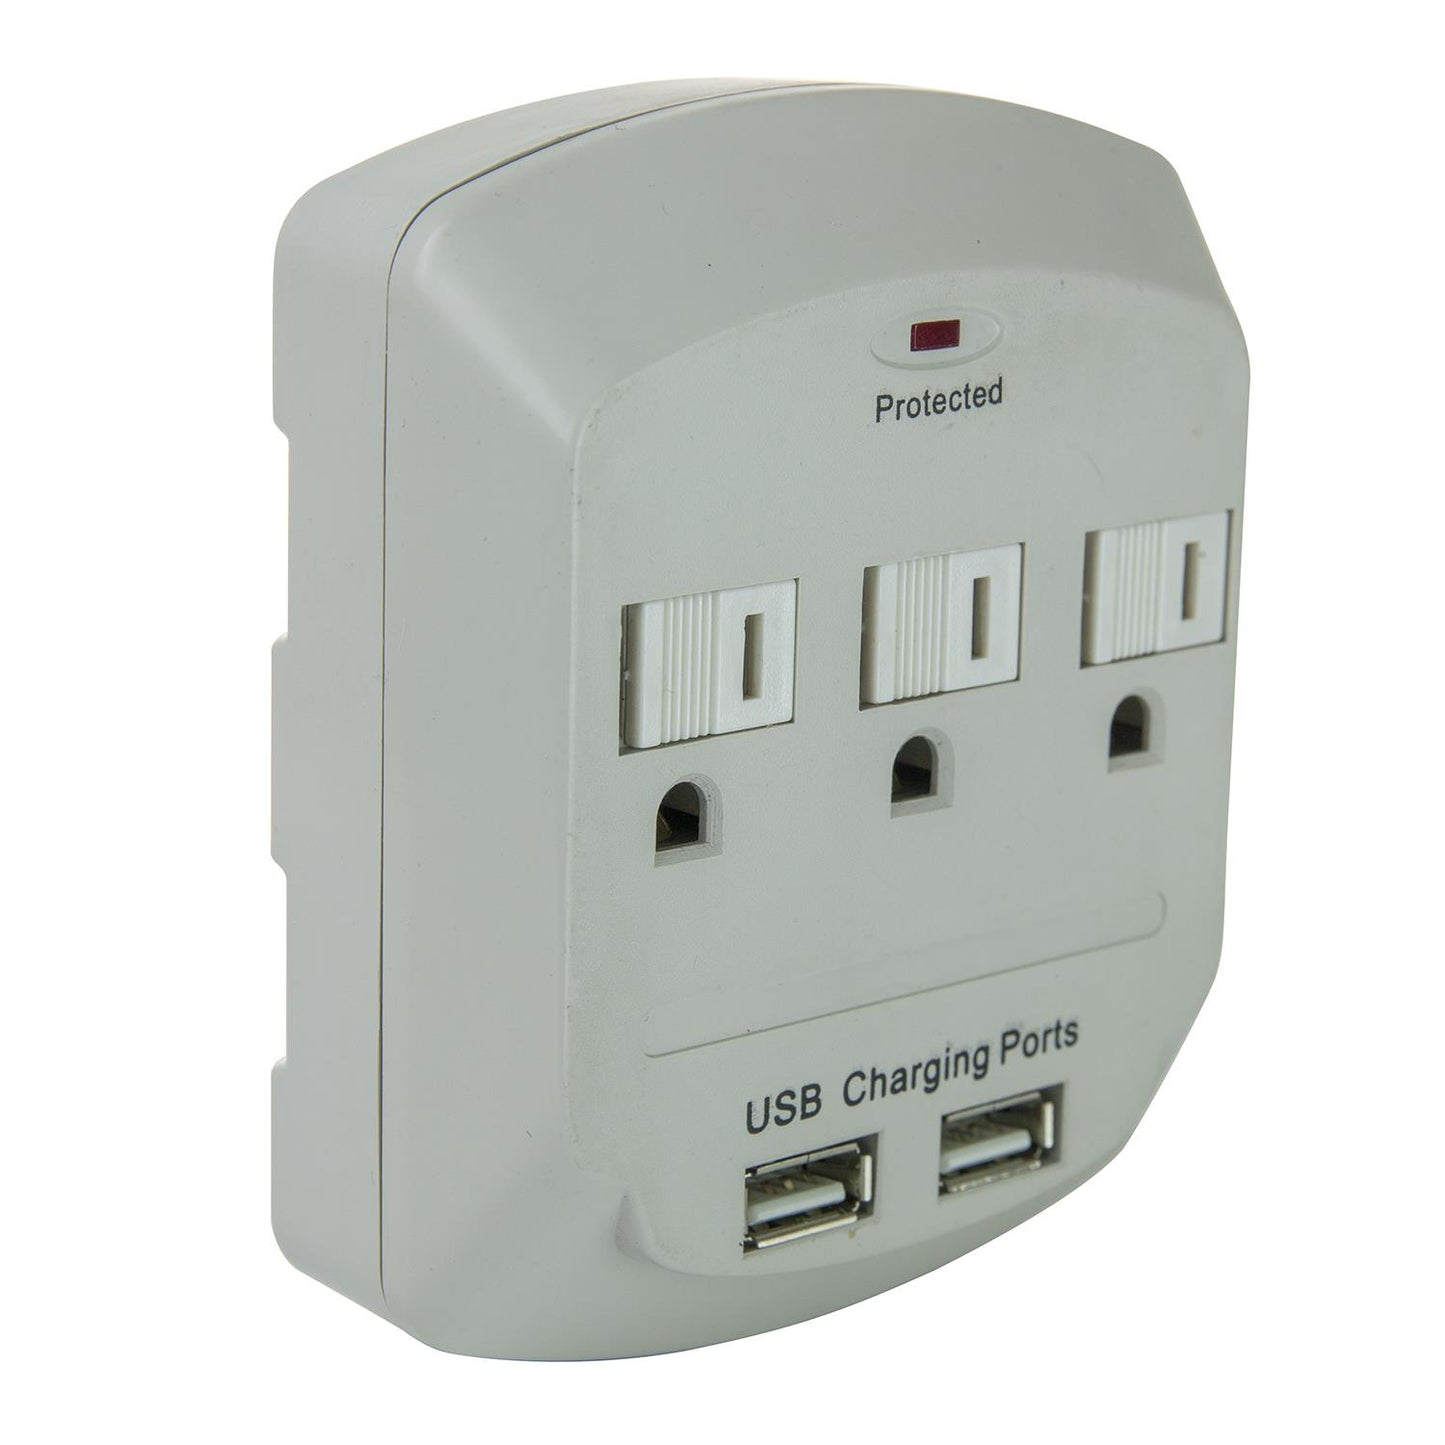 Sunlite E148 3 Outlet Surge Protector with 2 USB Ports